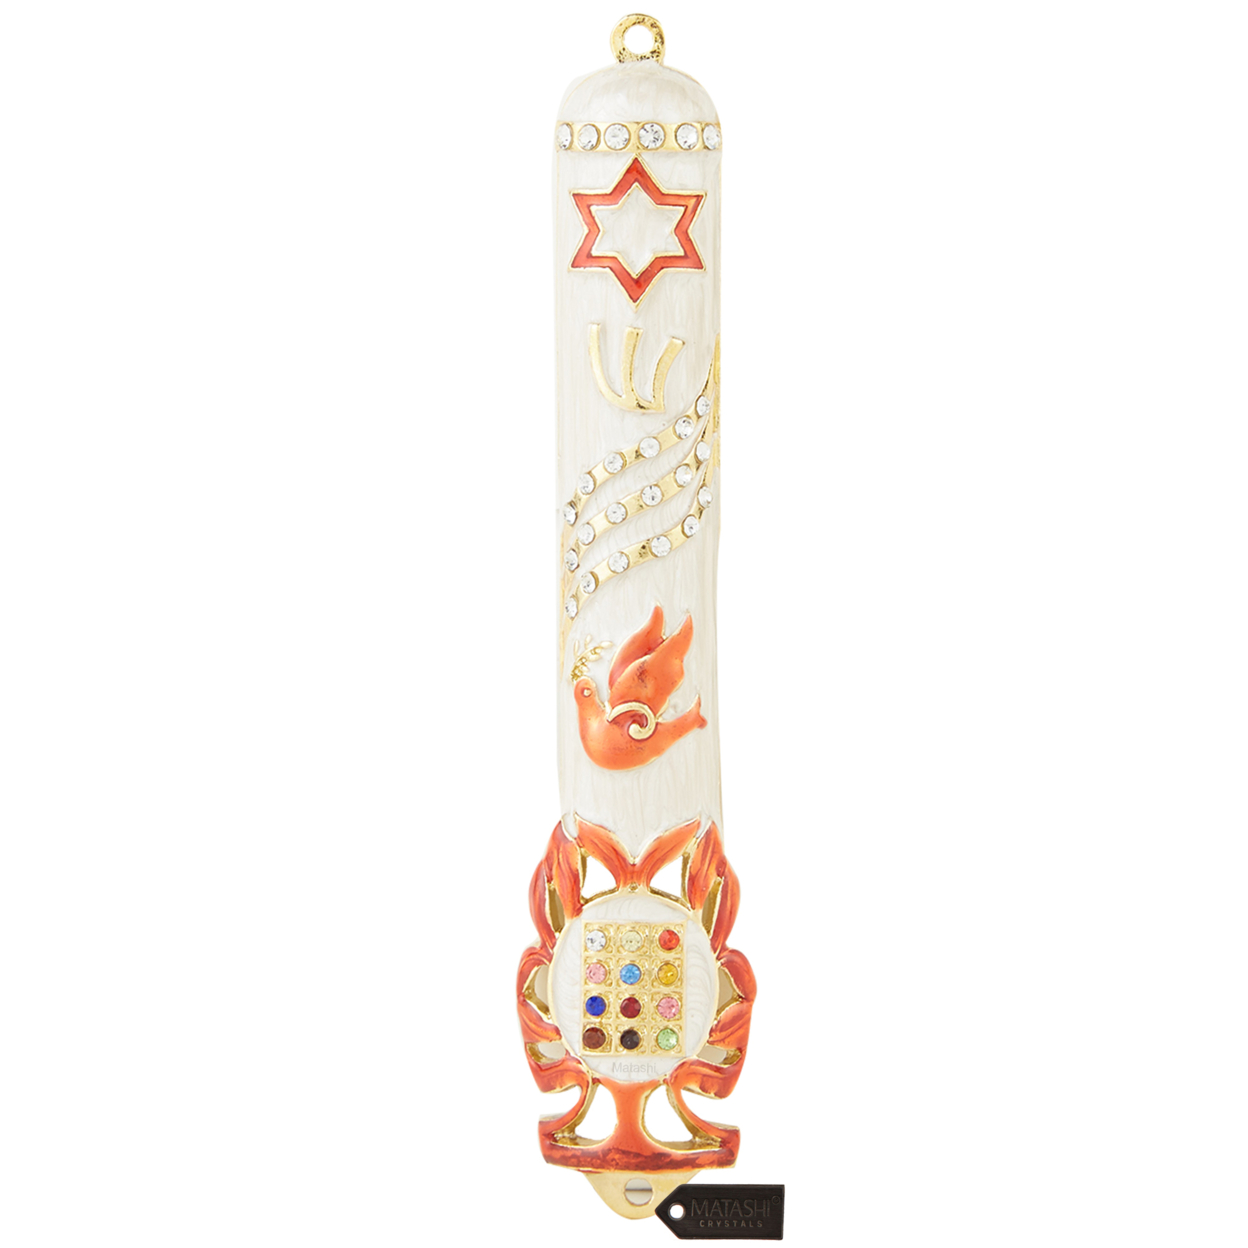 Matashi Hand Painted Dove Mezuzah W Gold Accents And Star Of David W Crystals Home Door Wall Decor Housewarming Present House Blessing Gift